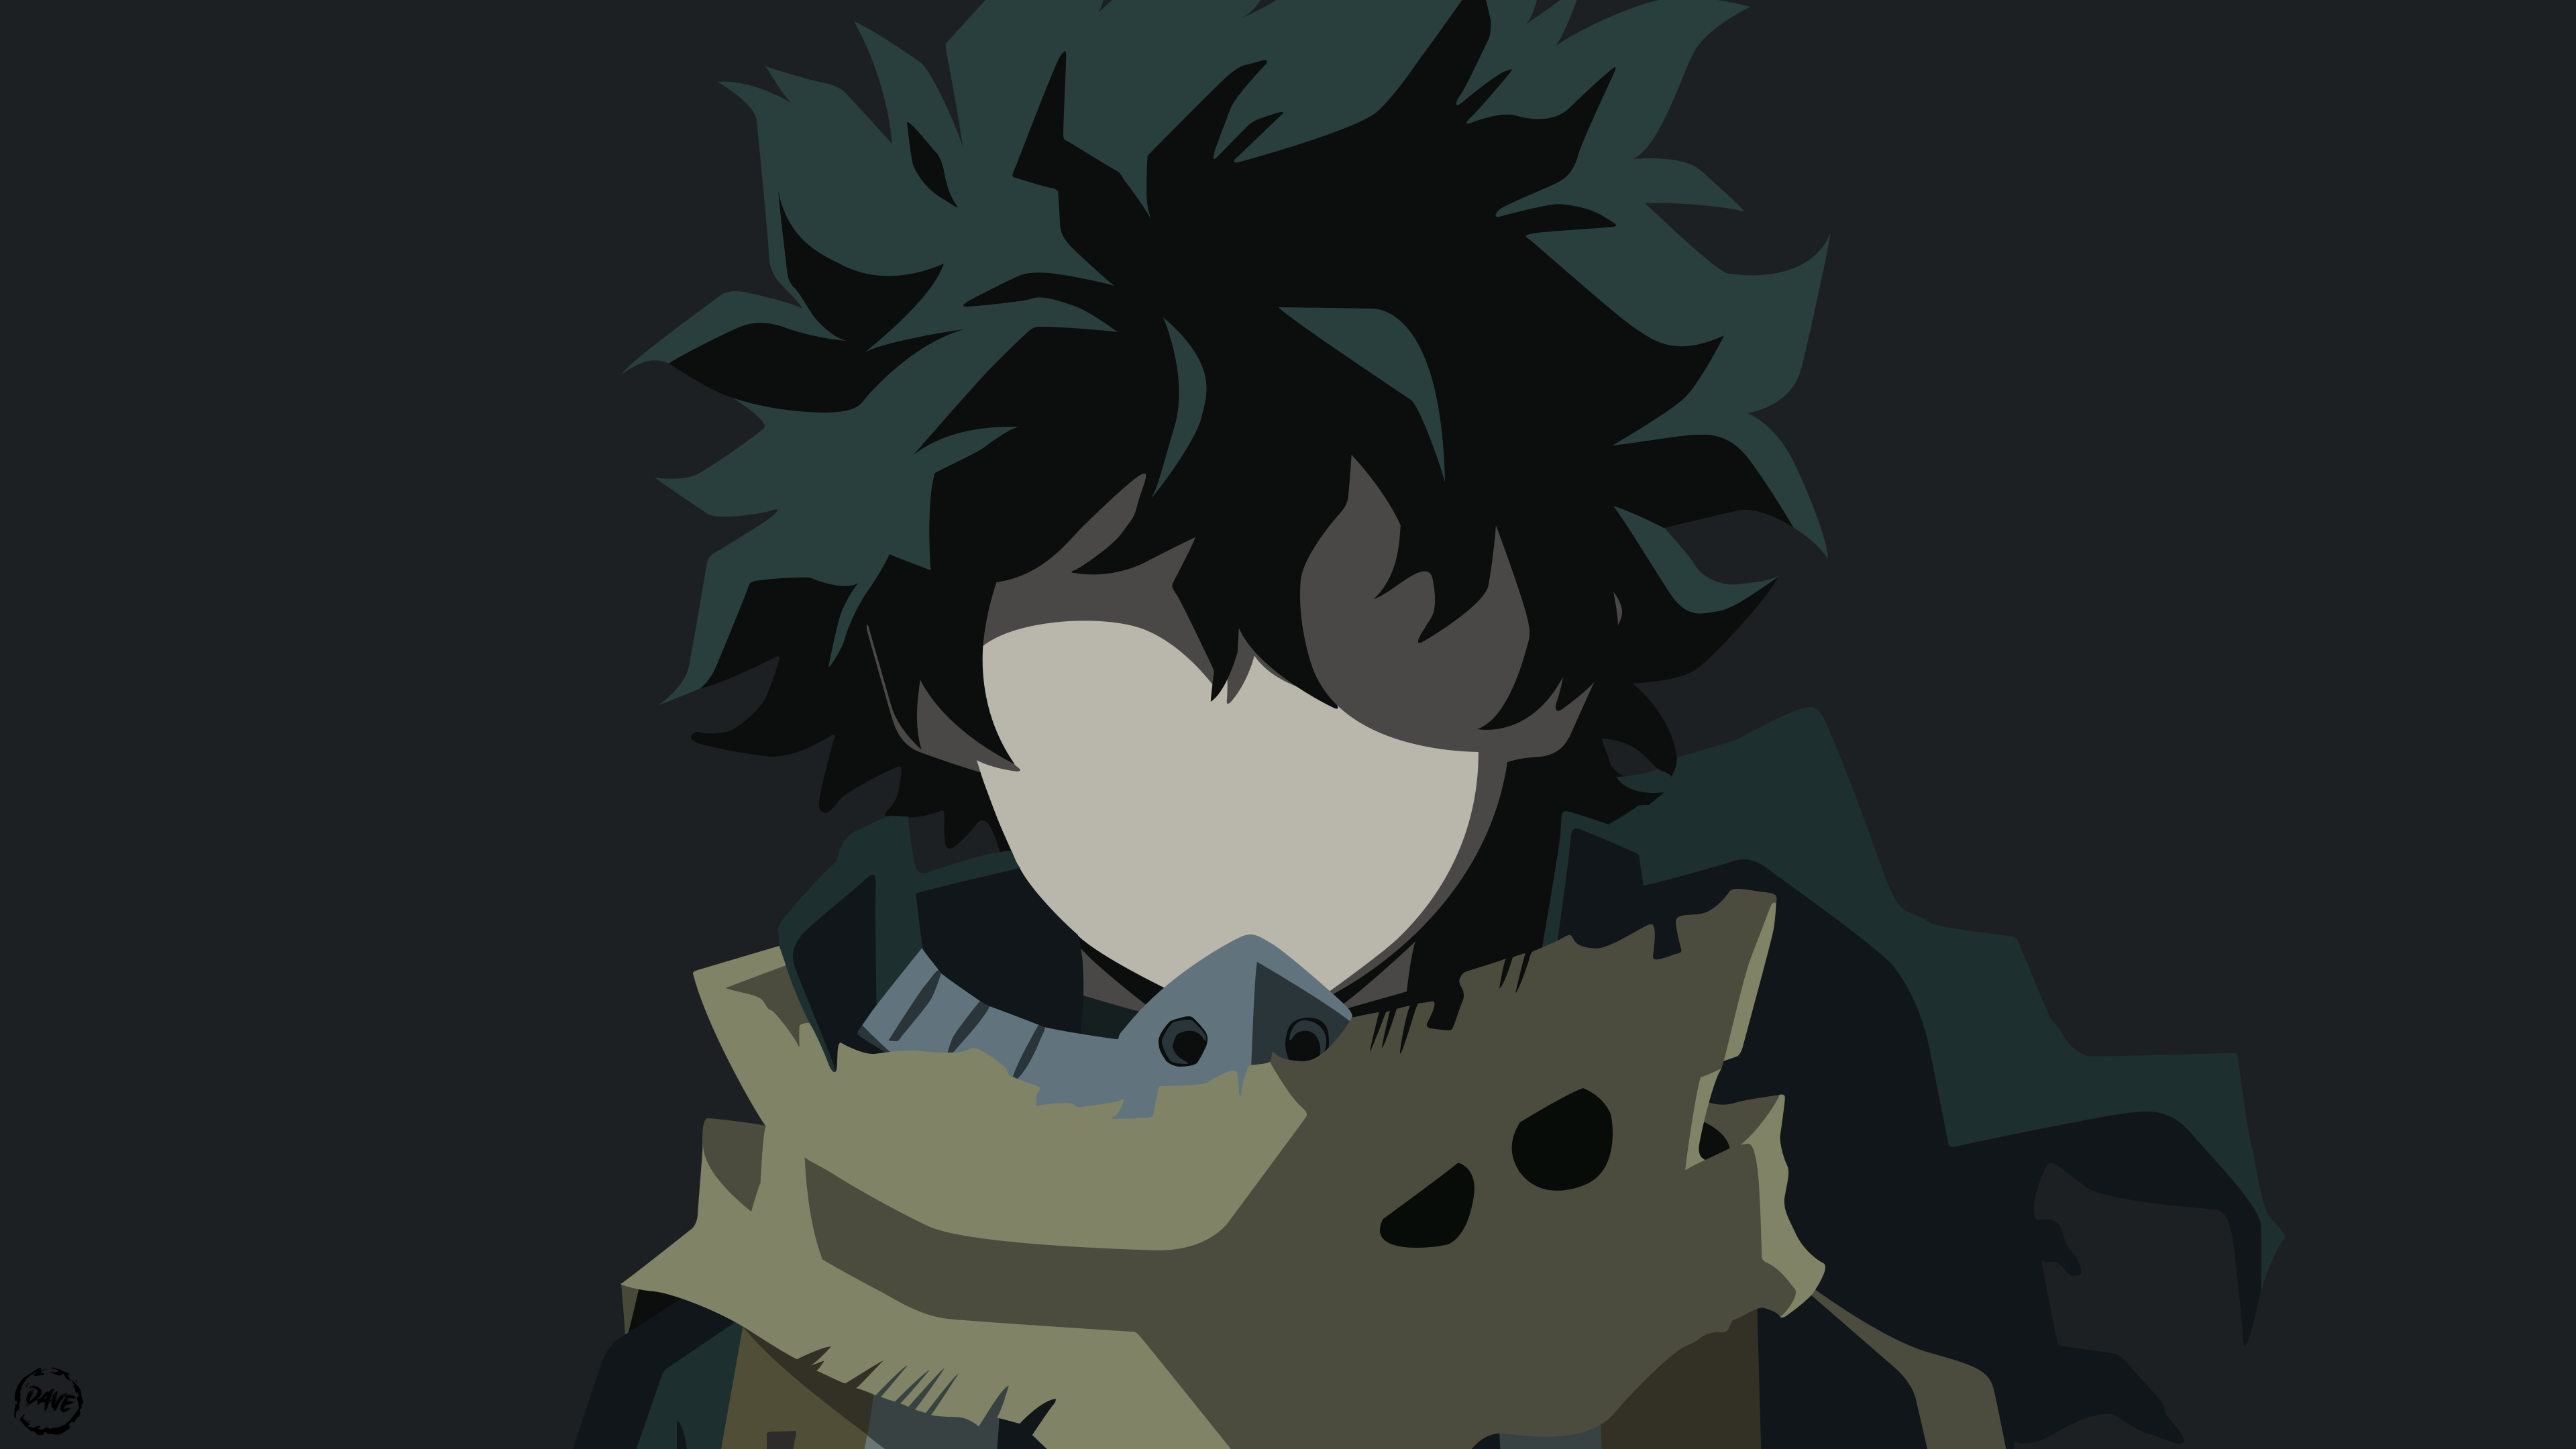 One for All Deku Wallpapers on WallpaperDog